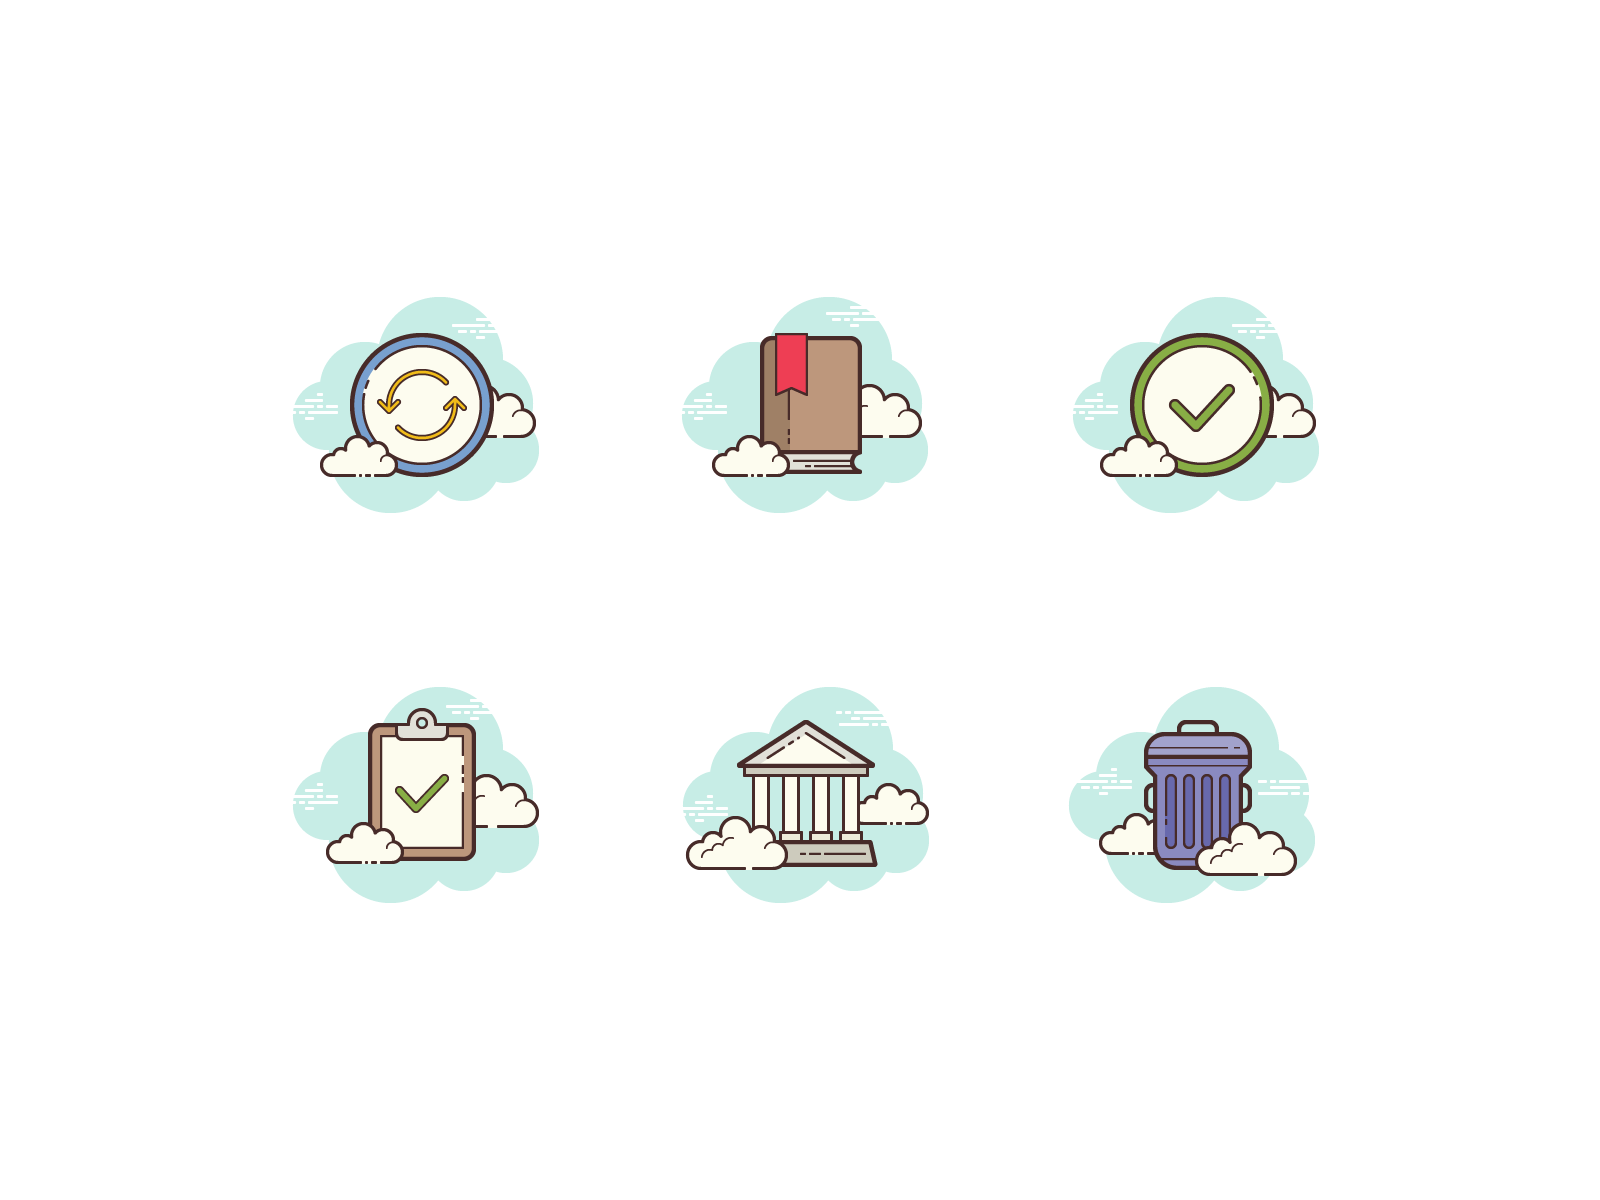 Clouds icons cloud clipboard check mark trash can museum check refresh bookmark illustration flat color icons8 ui icon set graphic design design digital art vector icons icon